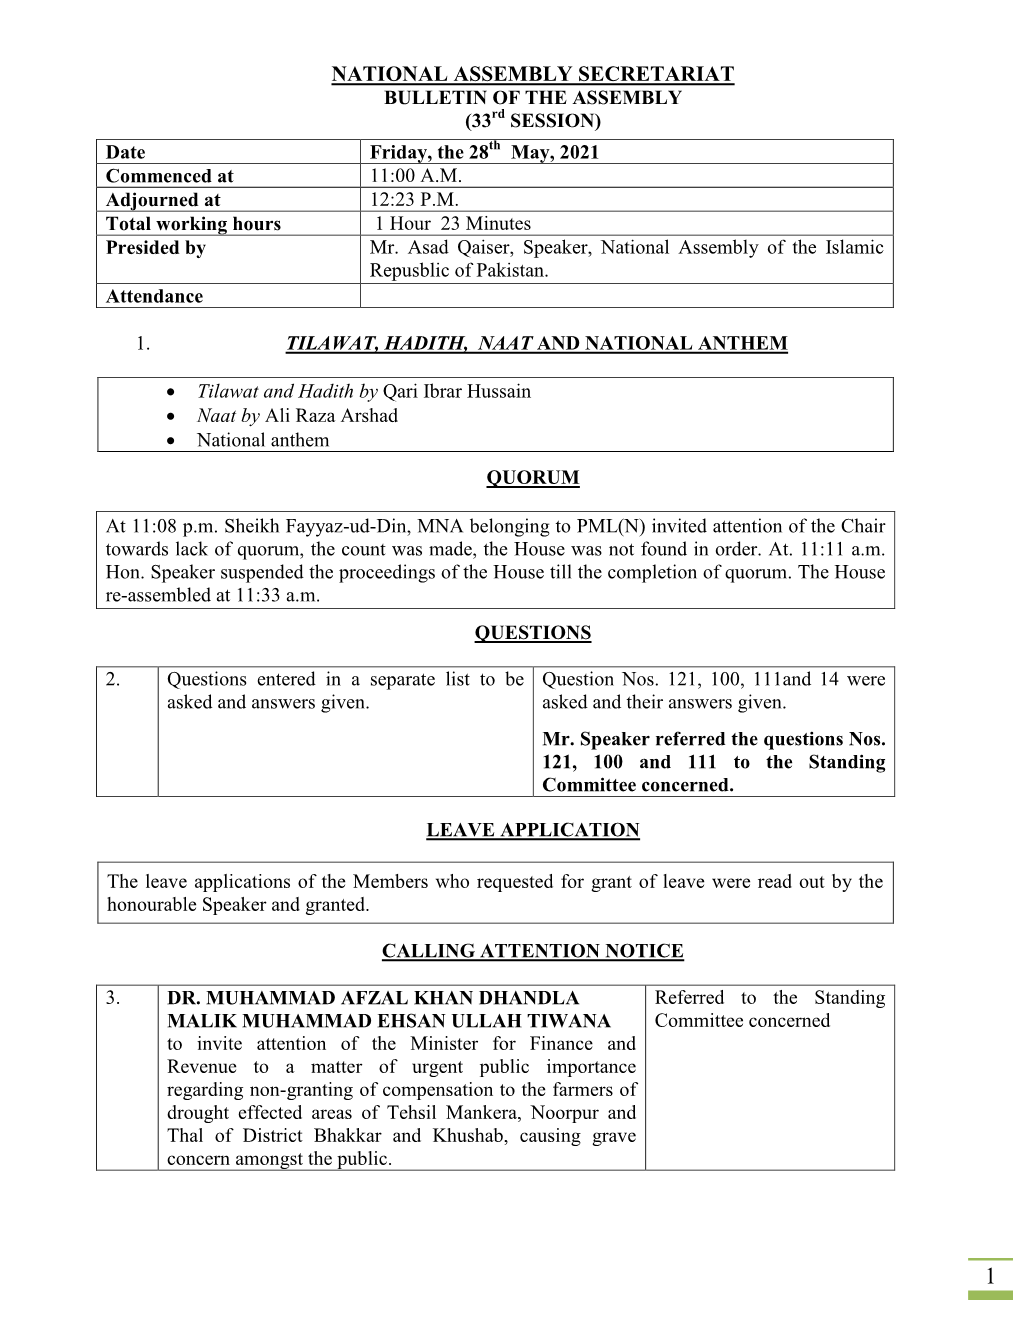 NATIONAL ASSEMBLY SECRETARIAT BULLETIN of the ASSEMBLY (33Rd SESSION)